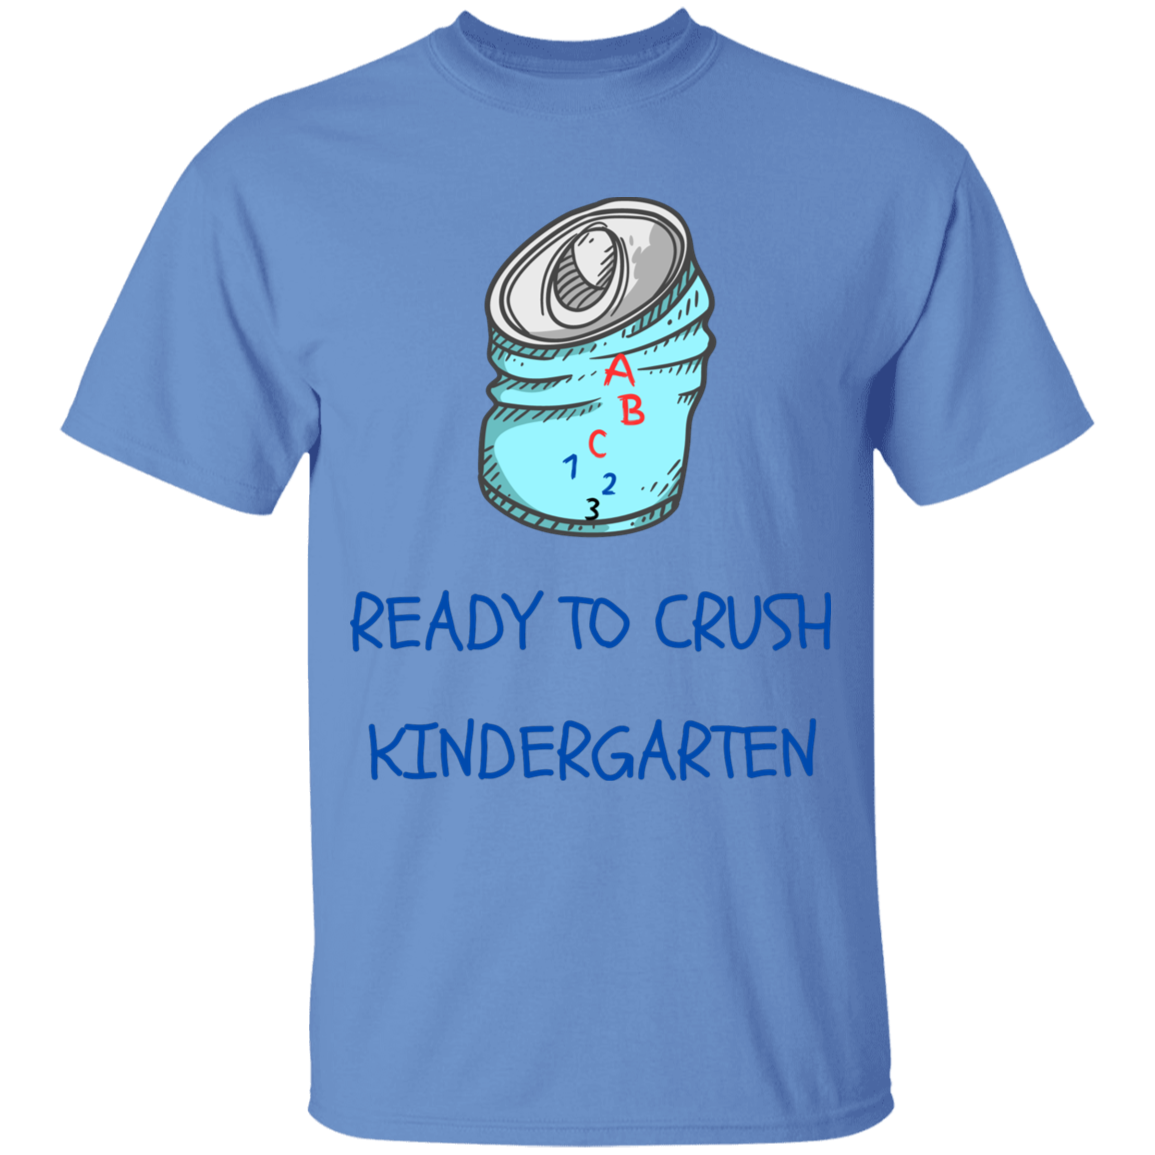 Get trendy with Youth Ready to crush kindergarten - T-Shirts available at Good Gift Company. Grab yours for $20.42 today!